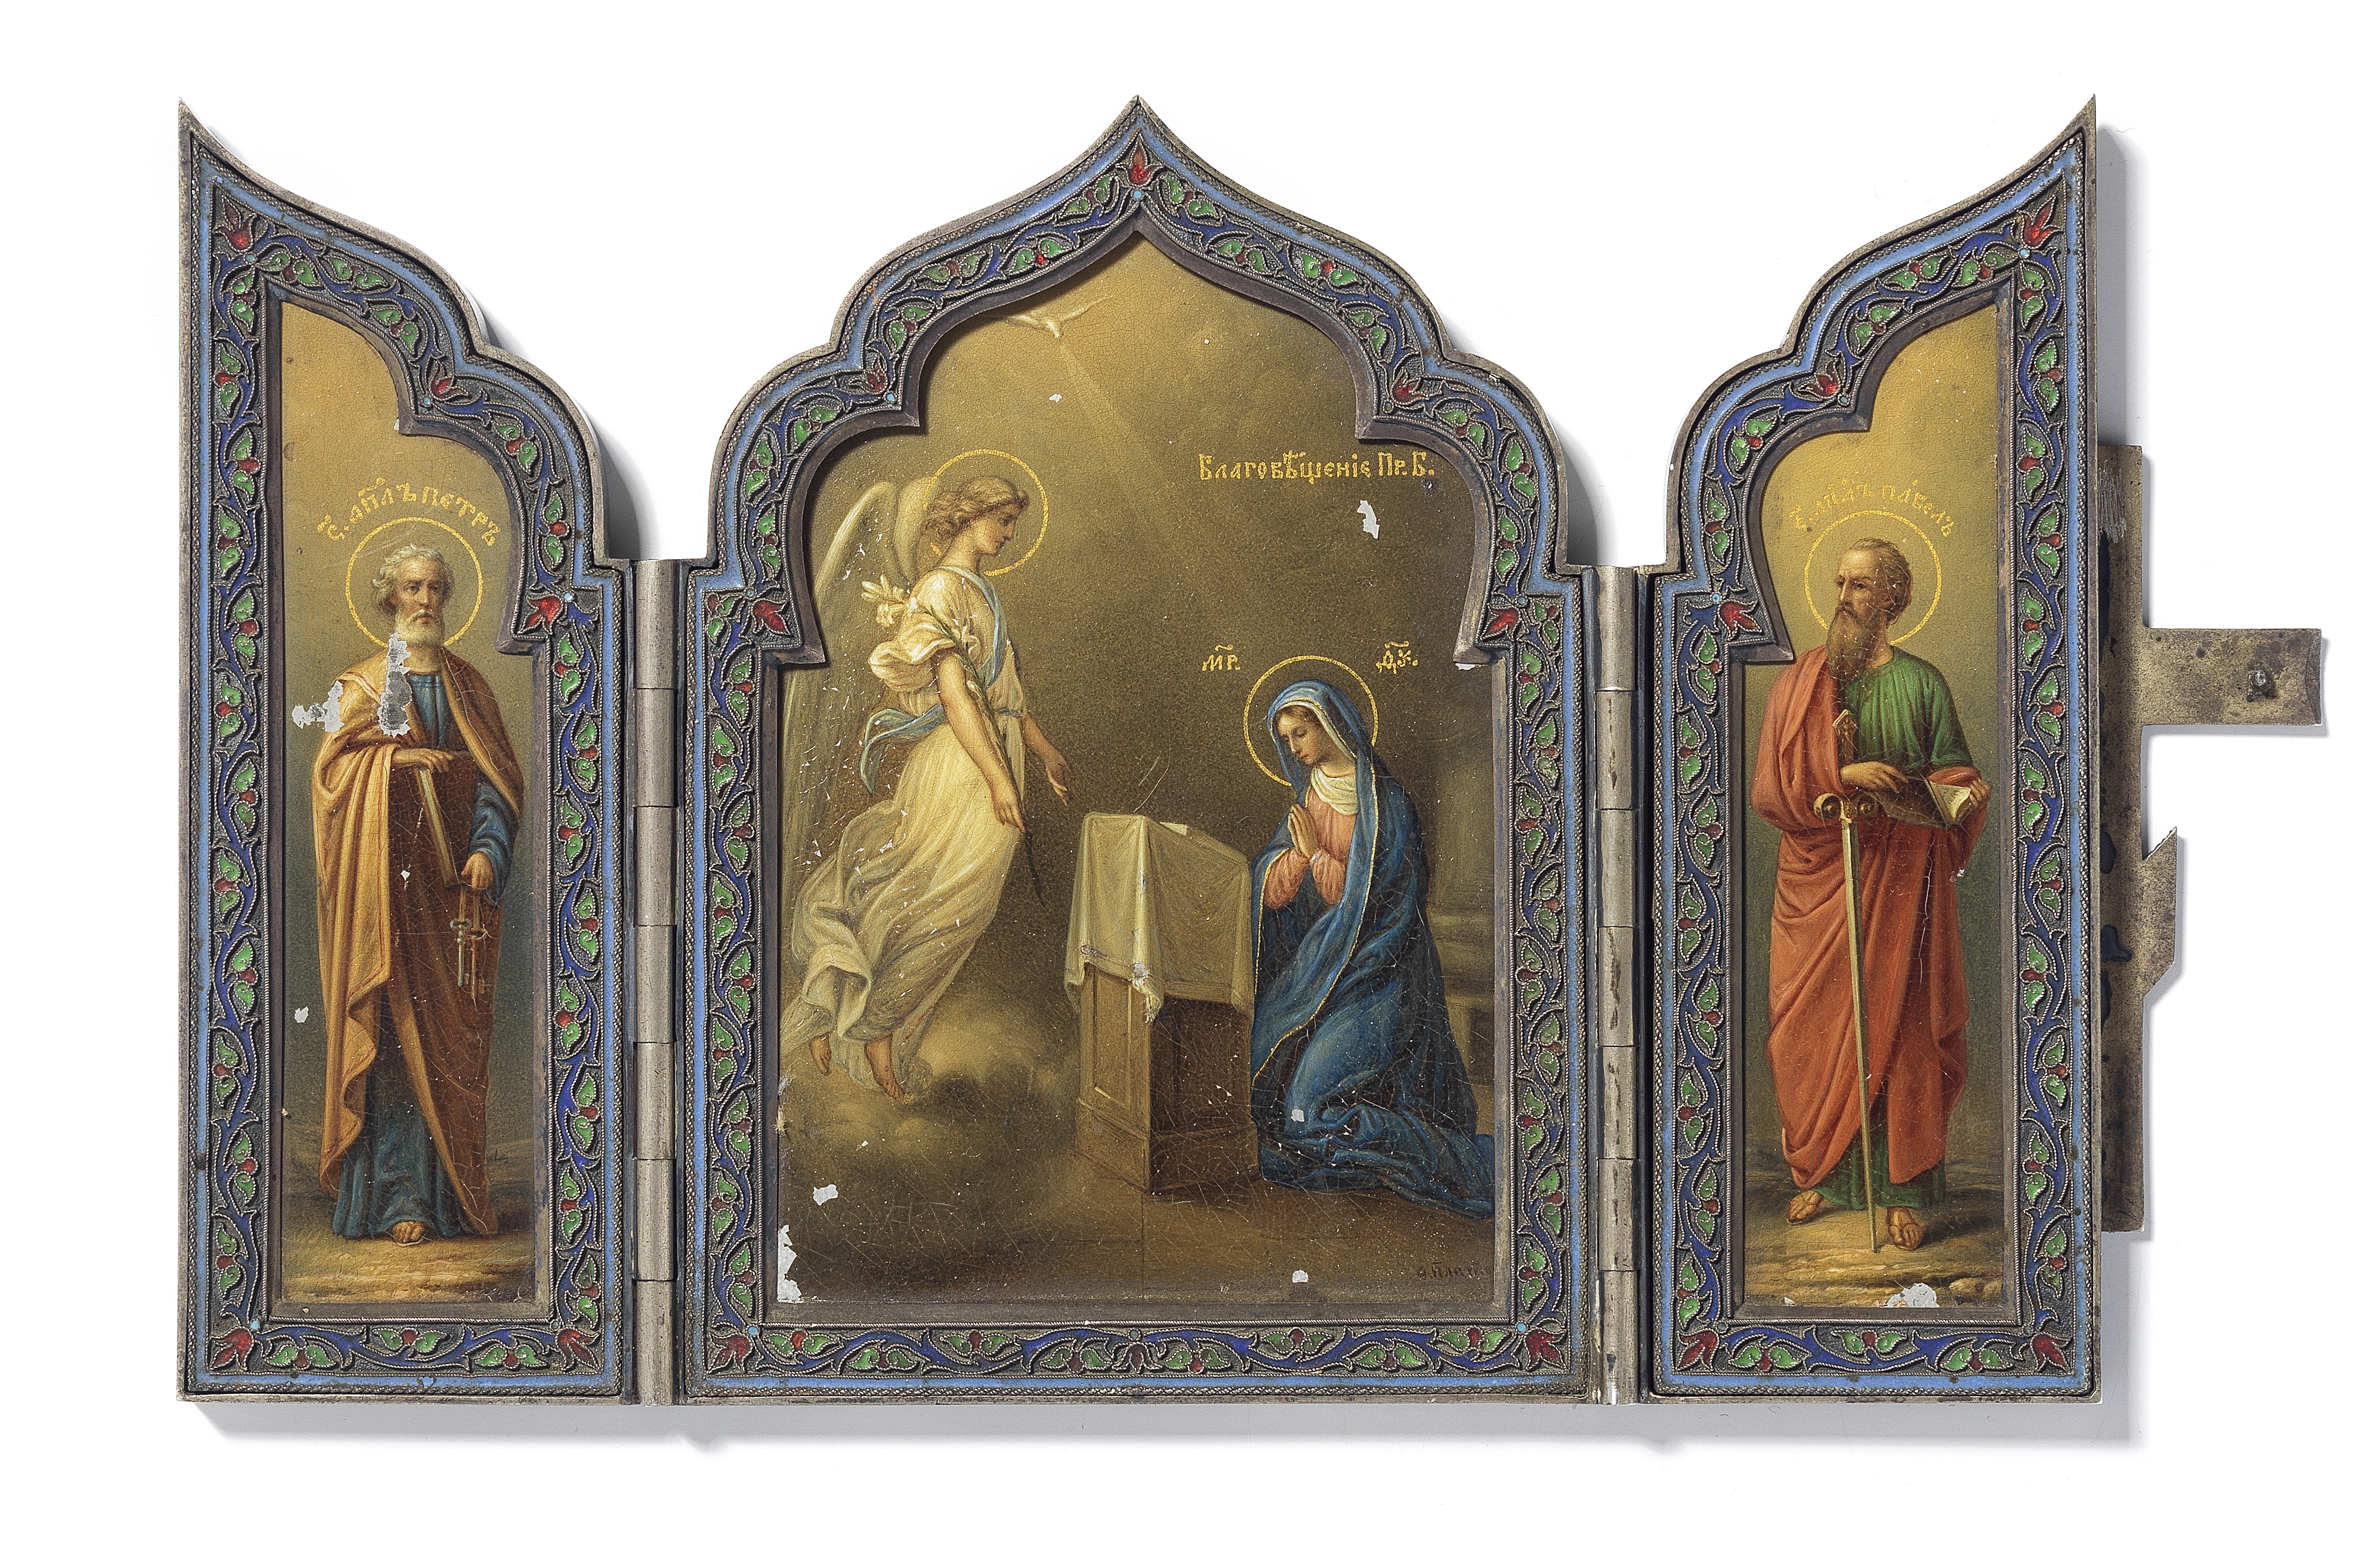 A RUSSIAN SILVER-GILT AND ENAMEL TRIPTYCH ICON Brothers Grachev firm, St. Petersburg, c. 1896